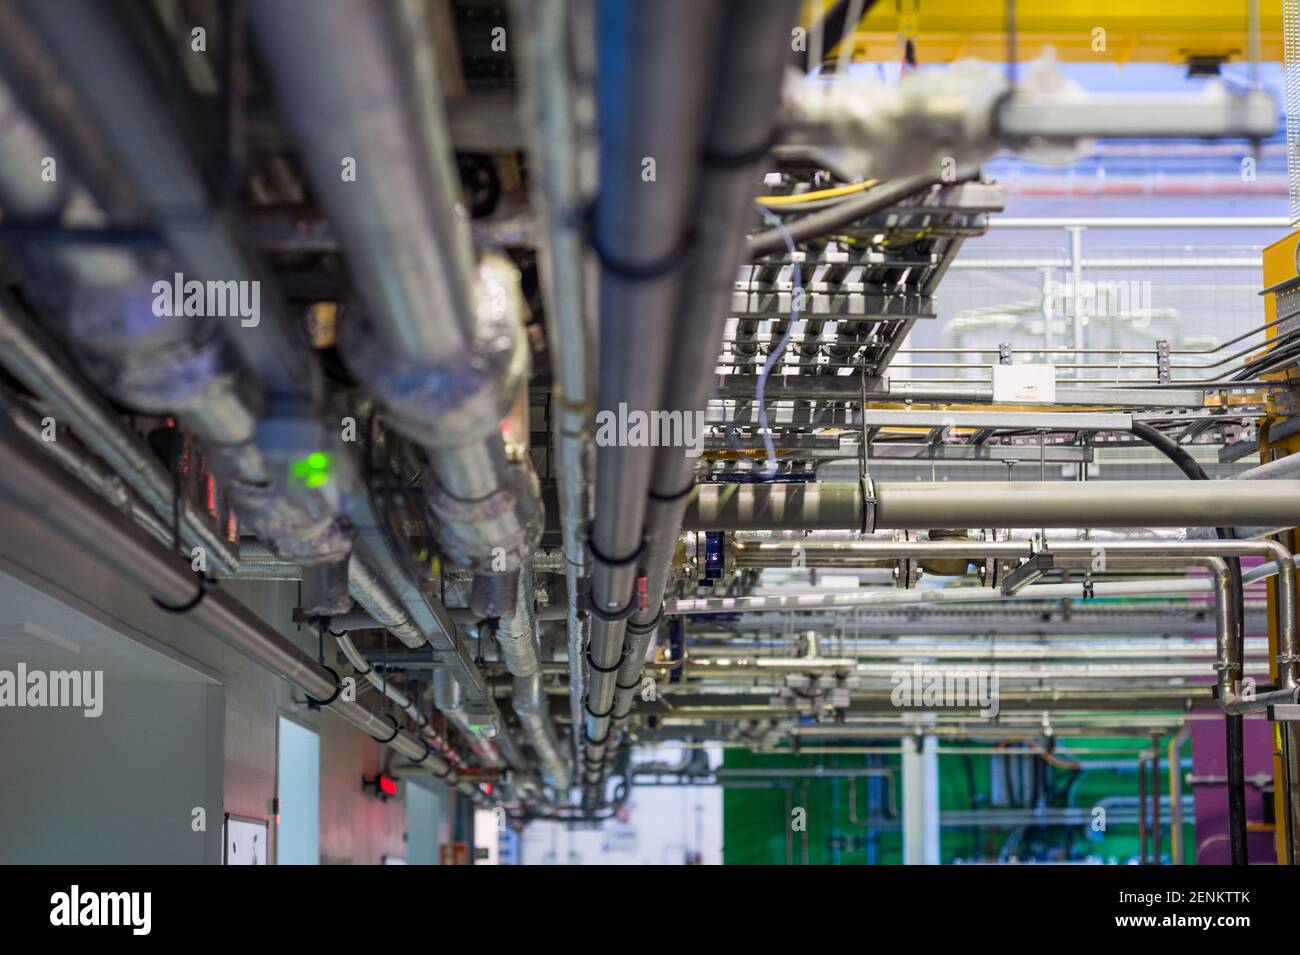 The  ISIS Neutron and Muon Source at the Rutherford Appleton Laboratory, Harwell, Oxfordshire, UK. Stock Photo